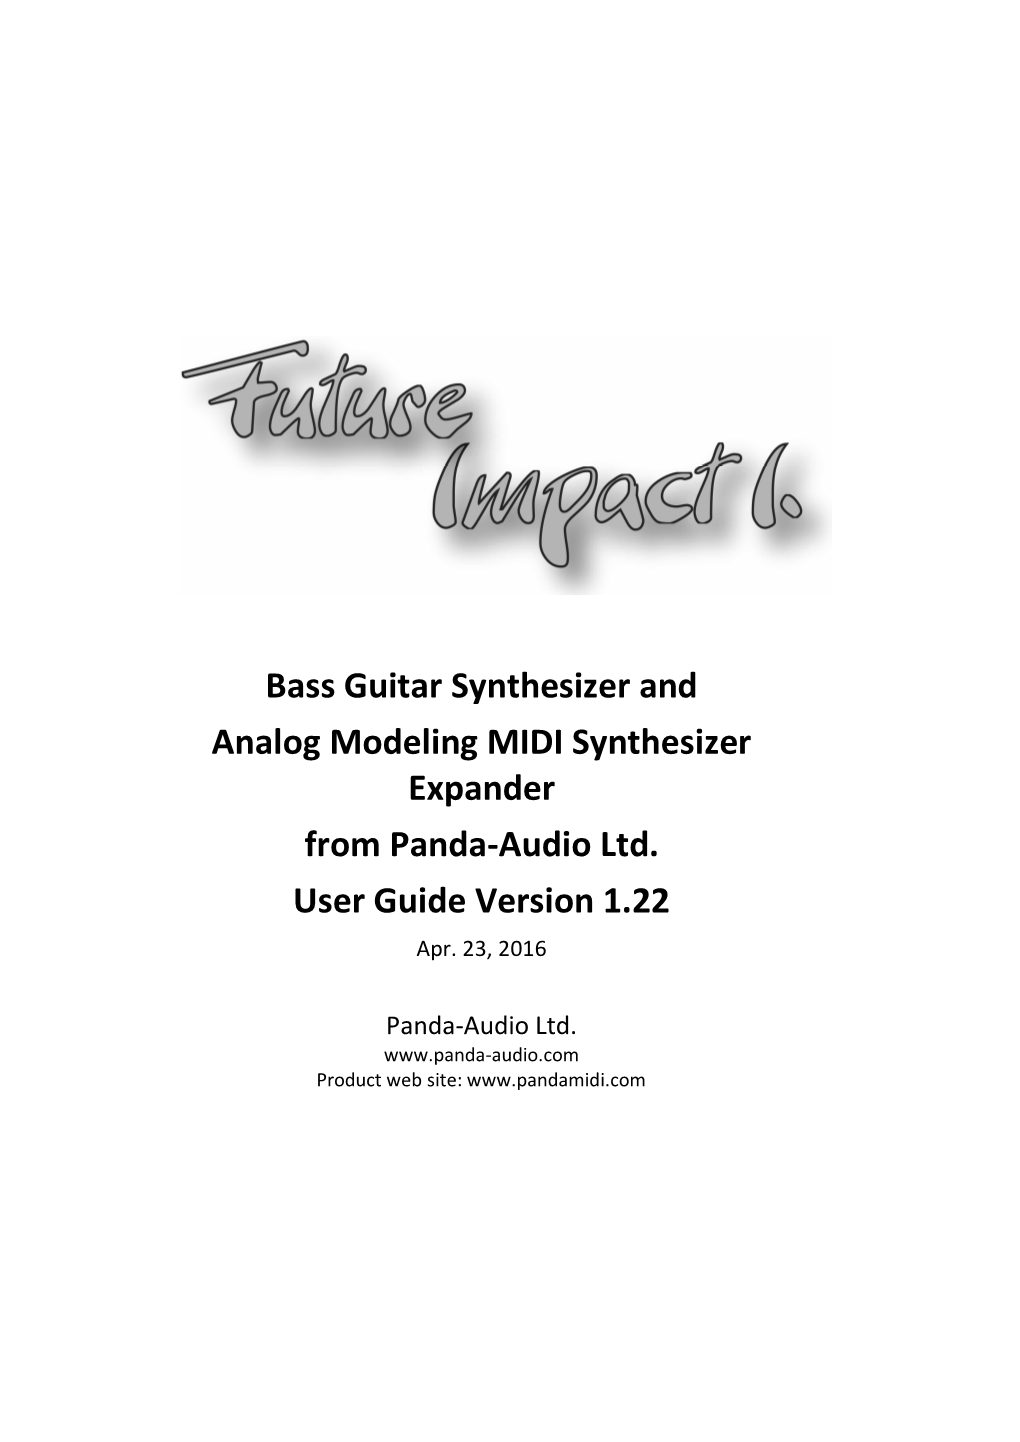 Bass Guitar Synthesizer and Analog Modeling MIDI Synthesizer Expander from Panda-Audio Ltd. User Guide Version 1.22